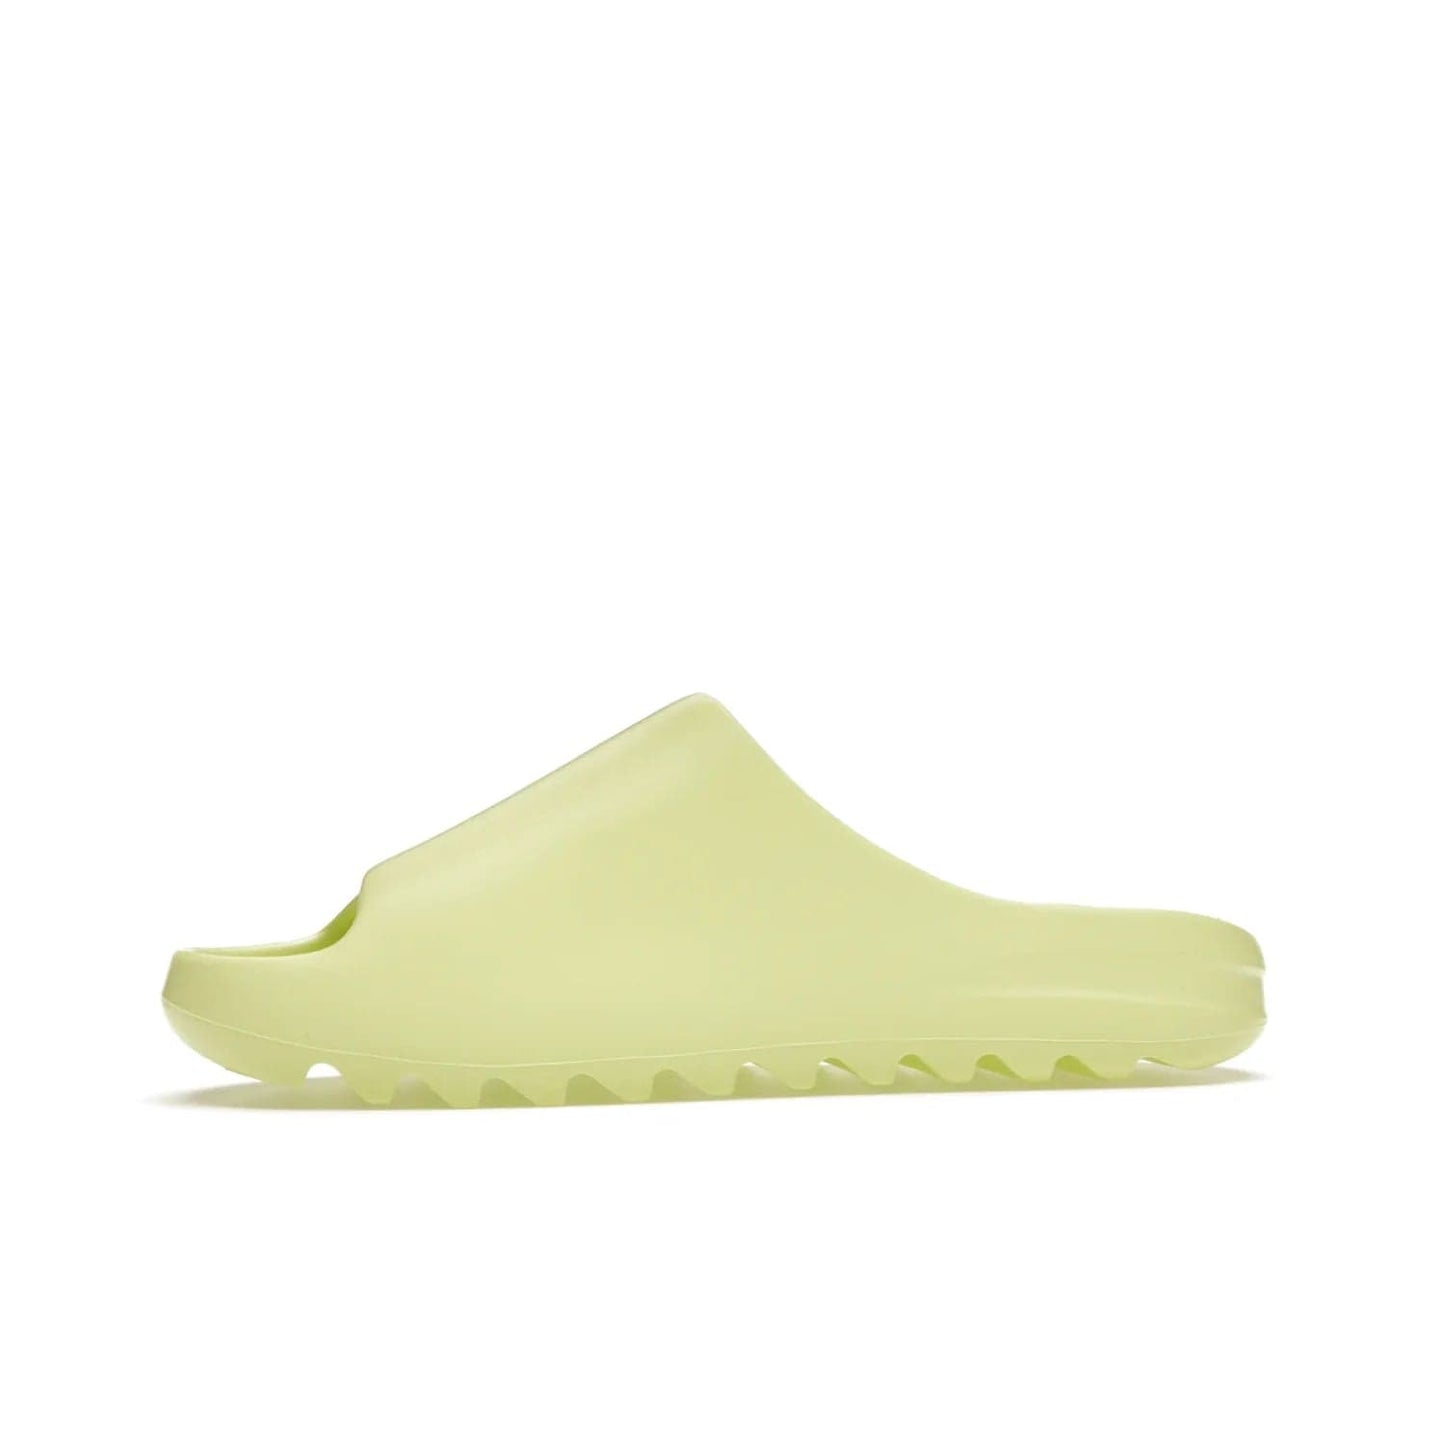 adidas Yeezy Slide Glow Green - Image 18 - Only at www.BallersClubKickz.com - Experience an unexpected summer style with the adidas Yeezy Slide Glow Green. This limited edition slide sandal provides a lightweight and durable construction and a bold Glow Green hue. Strategic grooves enhance traction and provide all-day comfort. Make a statement with the adidas Yeezy Slide Glow Green.